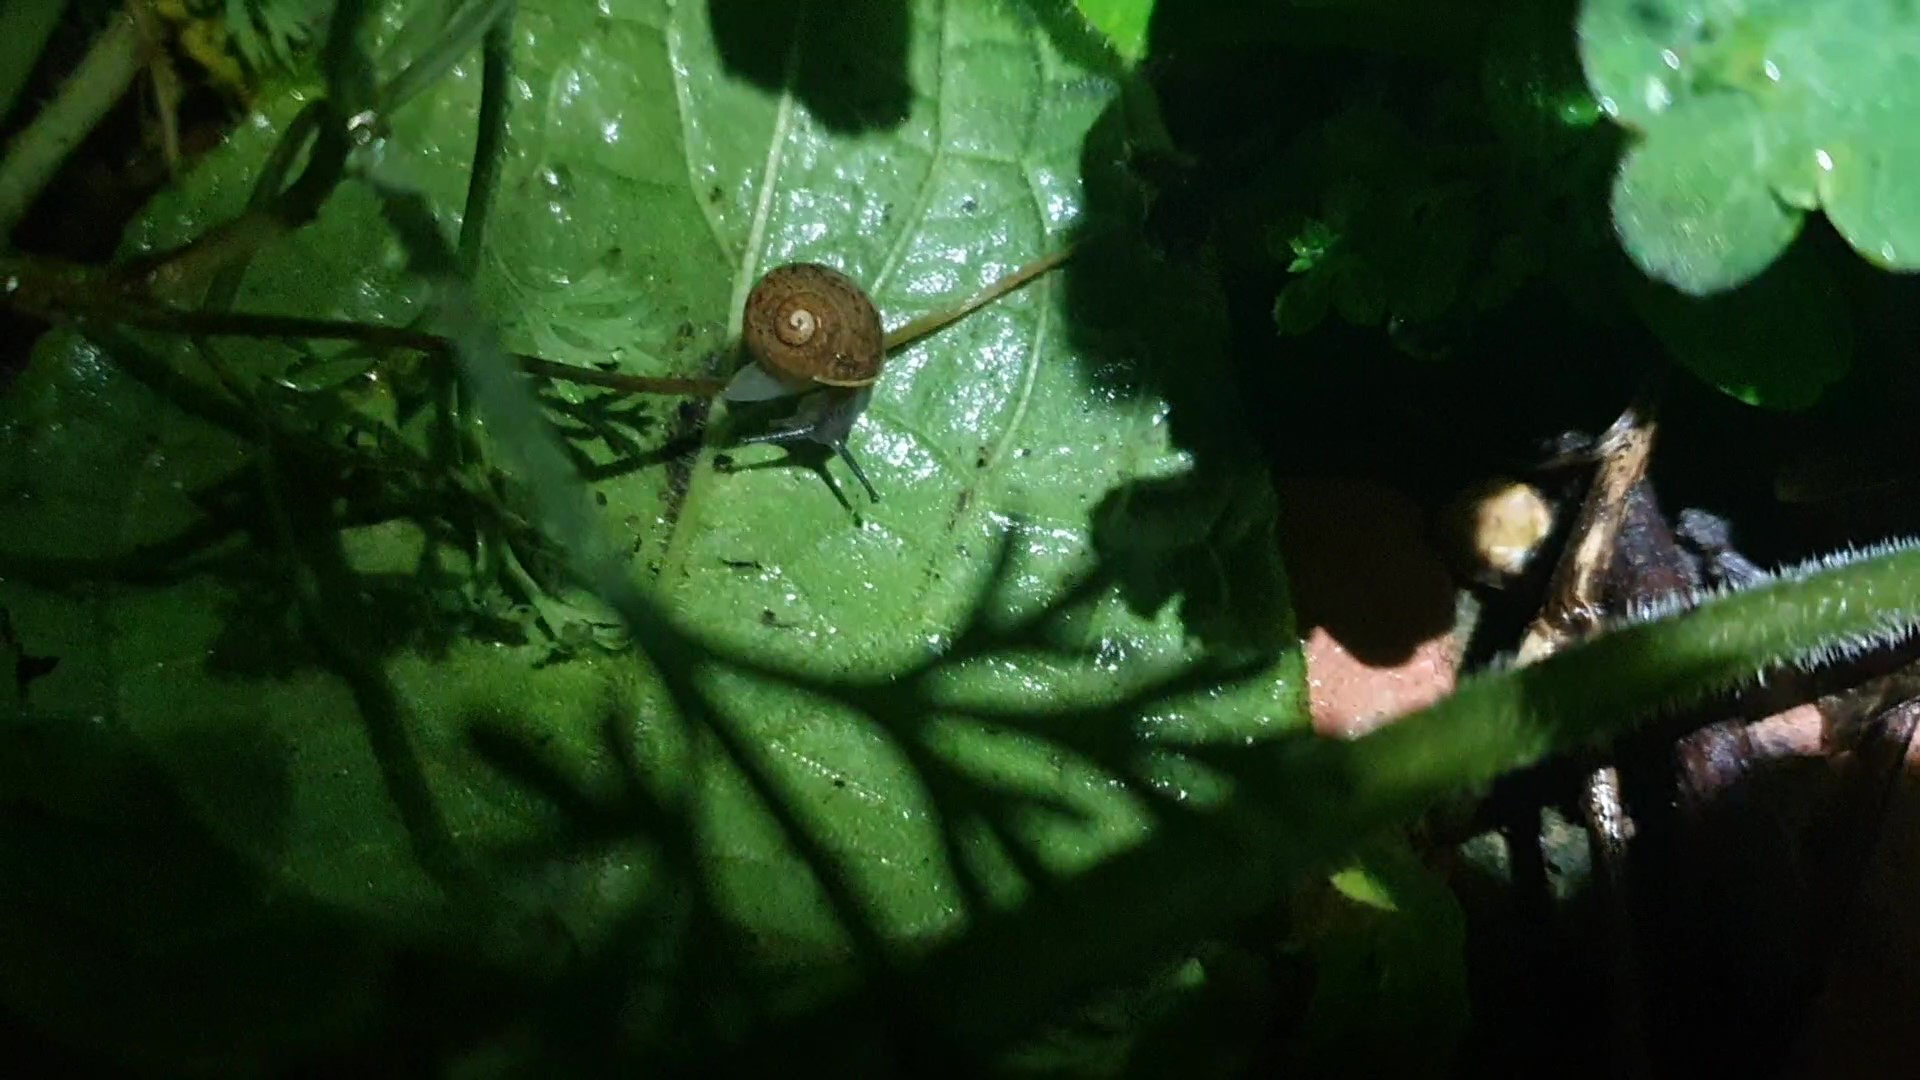 Close up of snail in shrubbery.